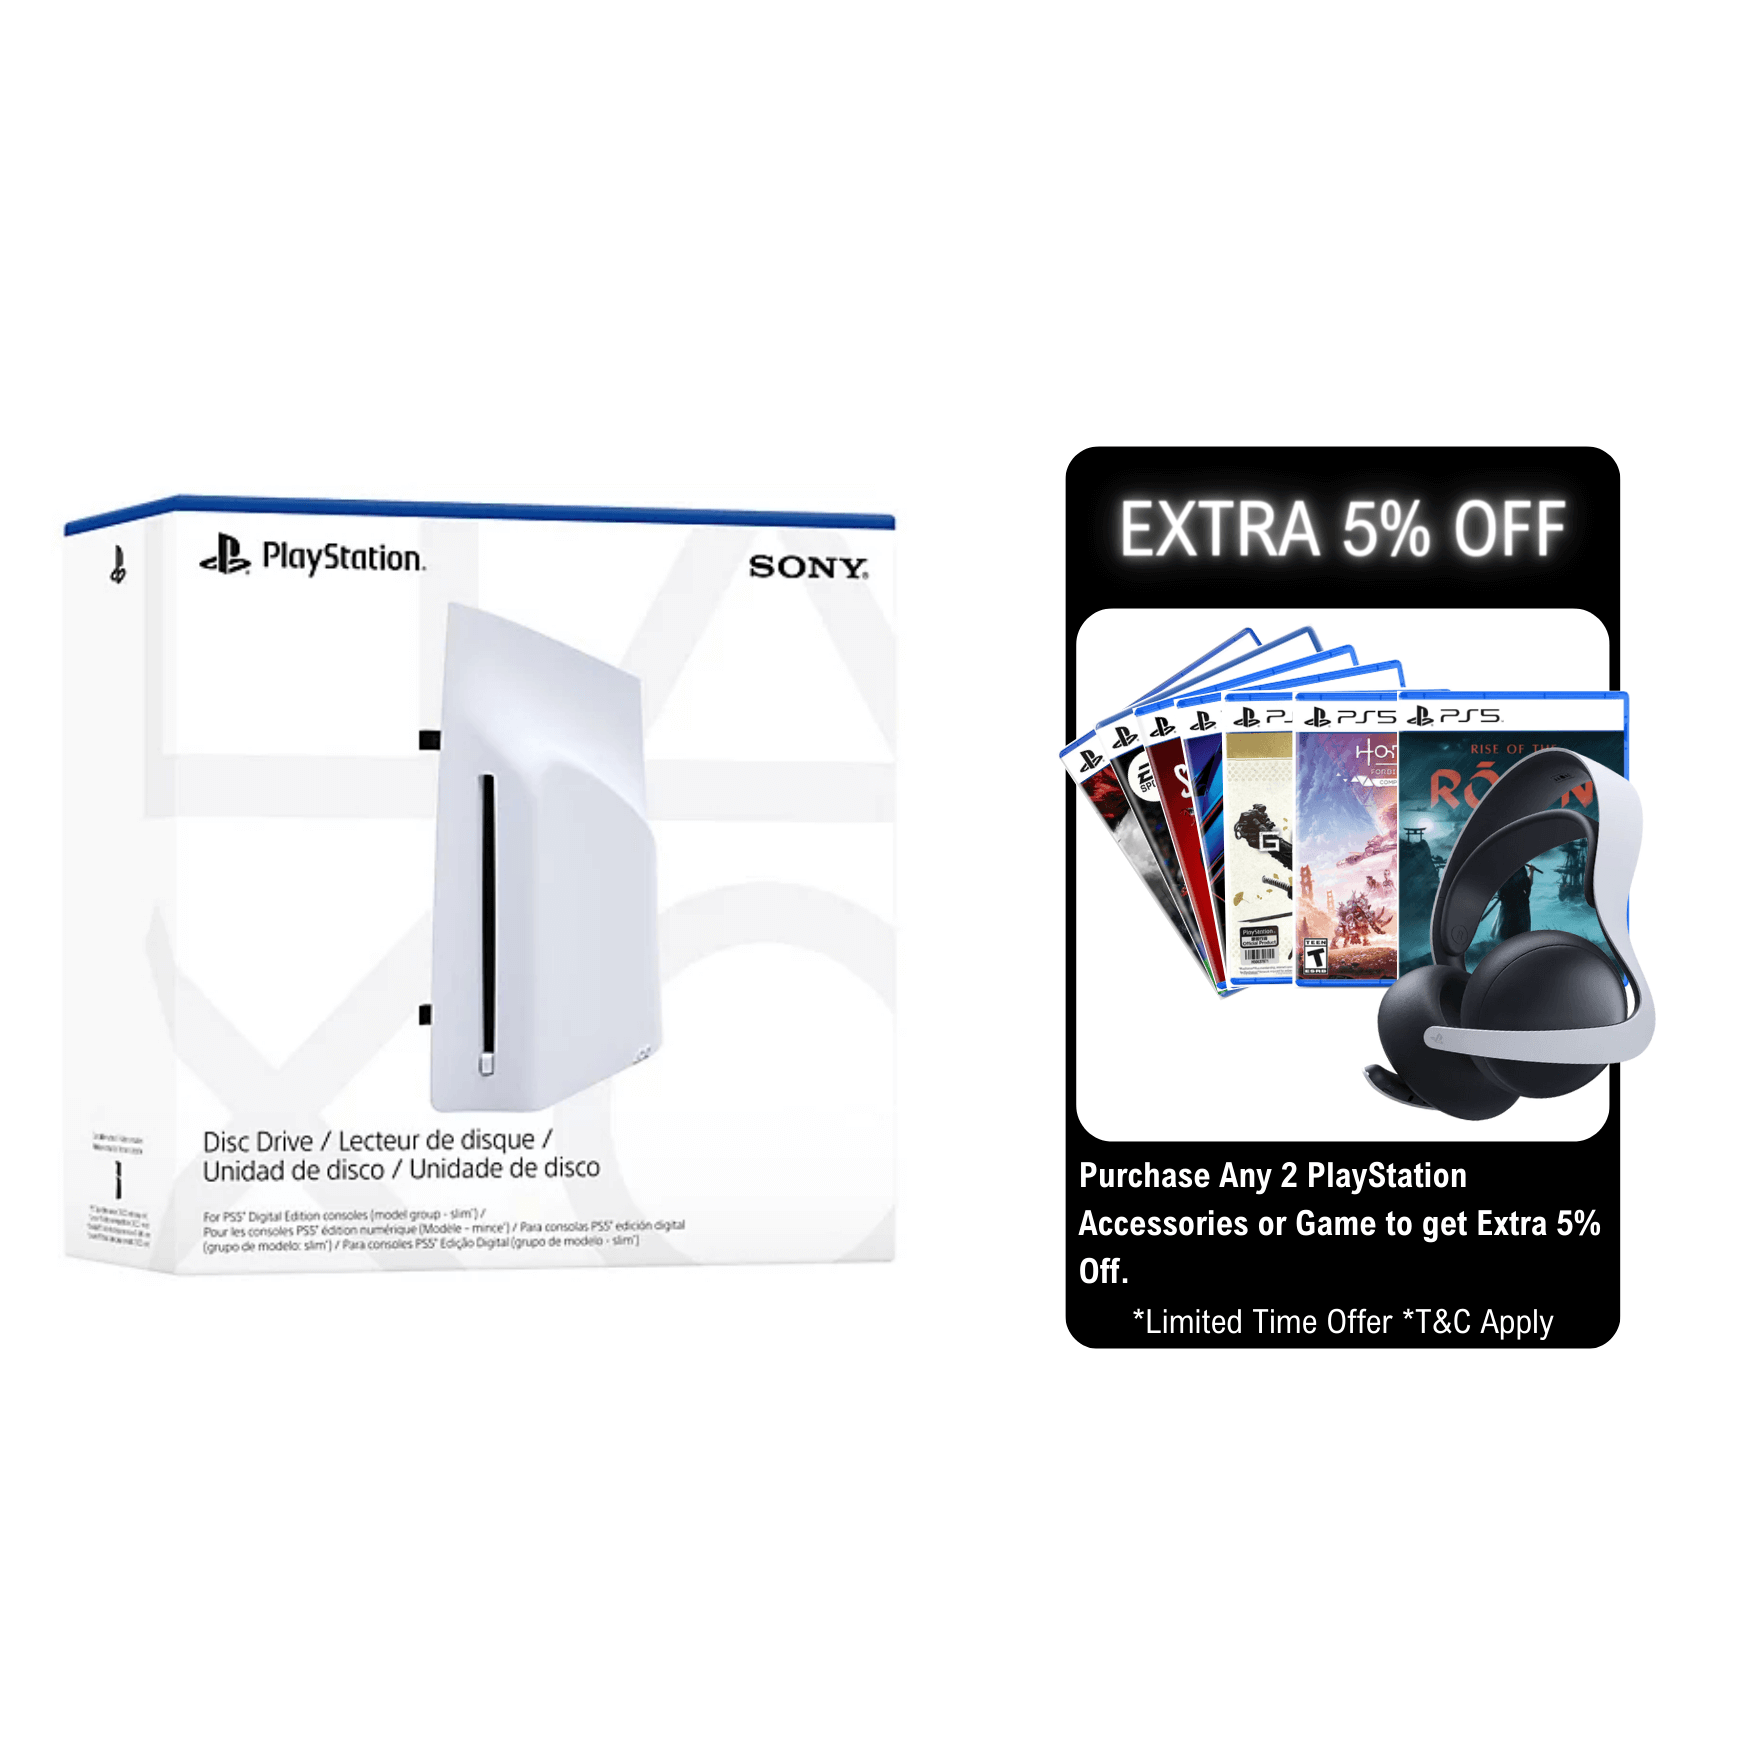 Sony PS5 Slim PlayStation 5 Slim Disc Drive For Digital Edition [PS5 ANY 2 5% OFF]